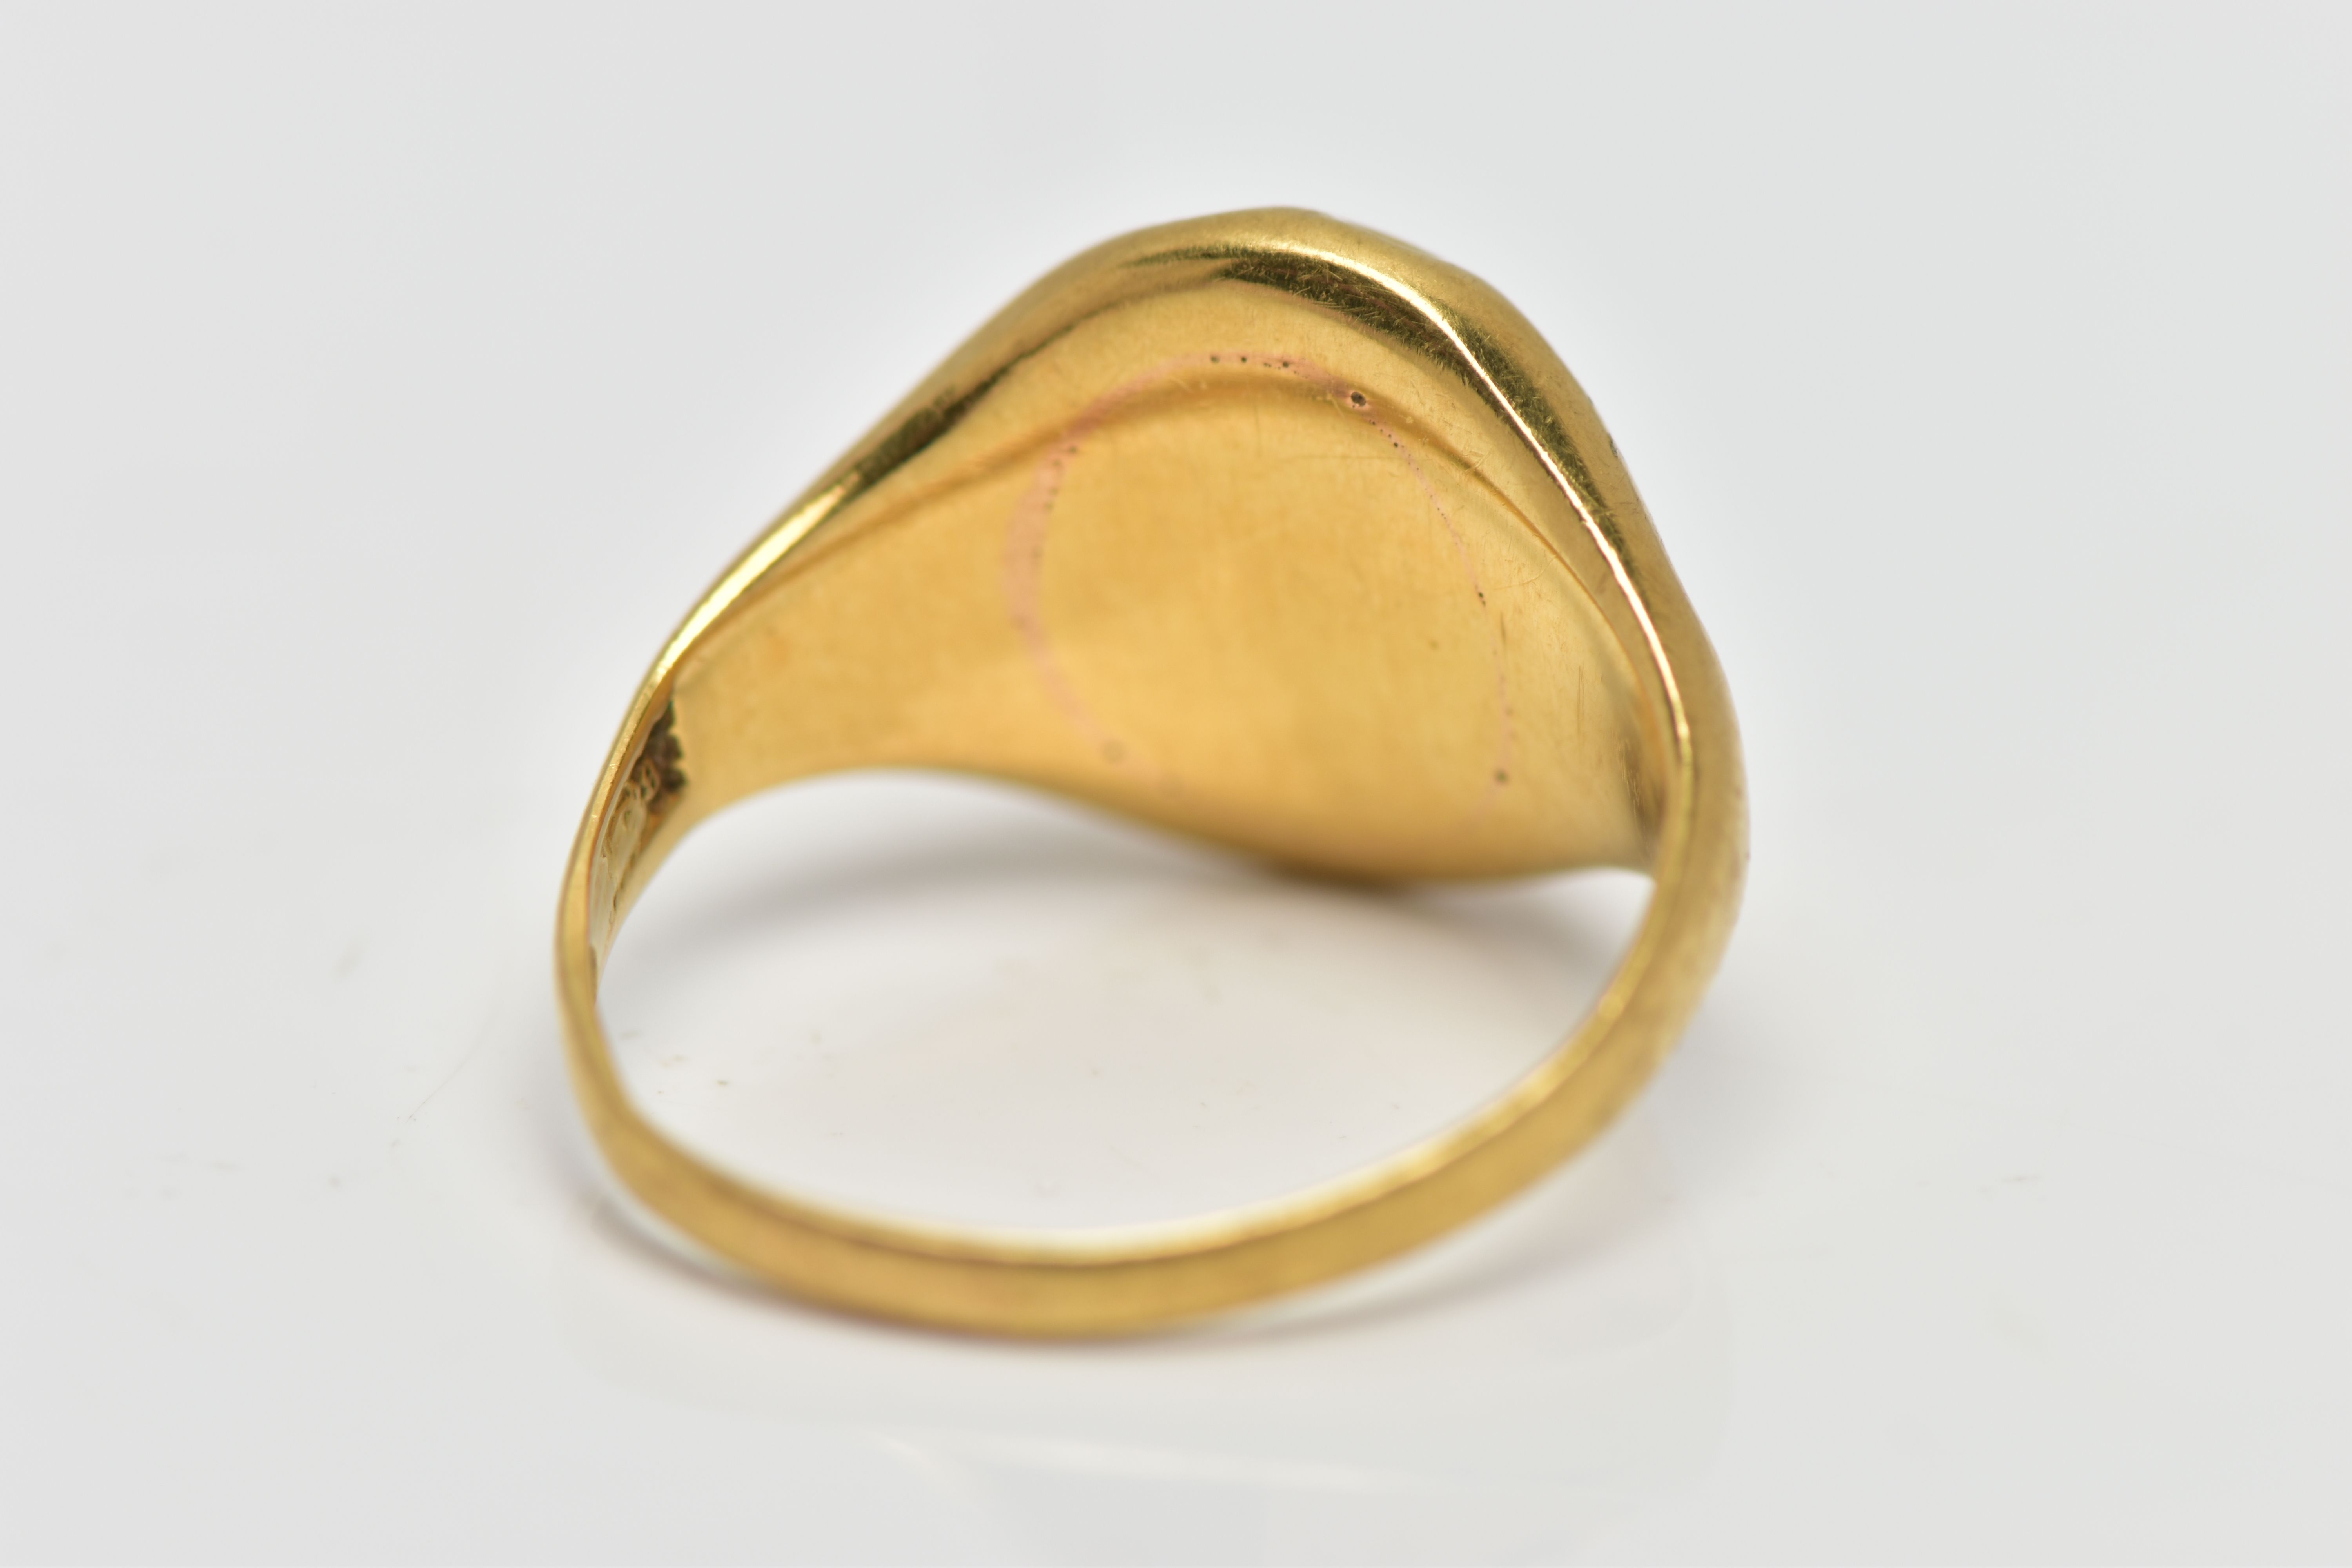 AN 18CT GOLD SIGNET RING, set with an oval bloodstone insert with an engraved initial 'C', worn - Image 3 of 4